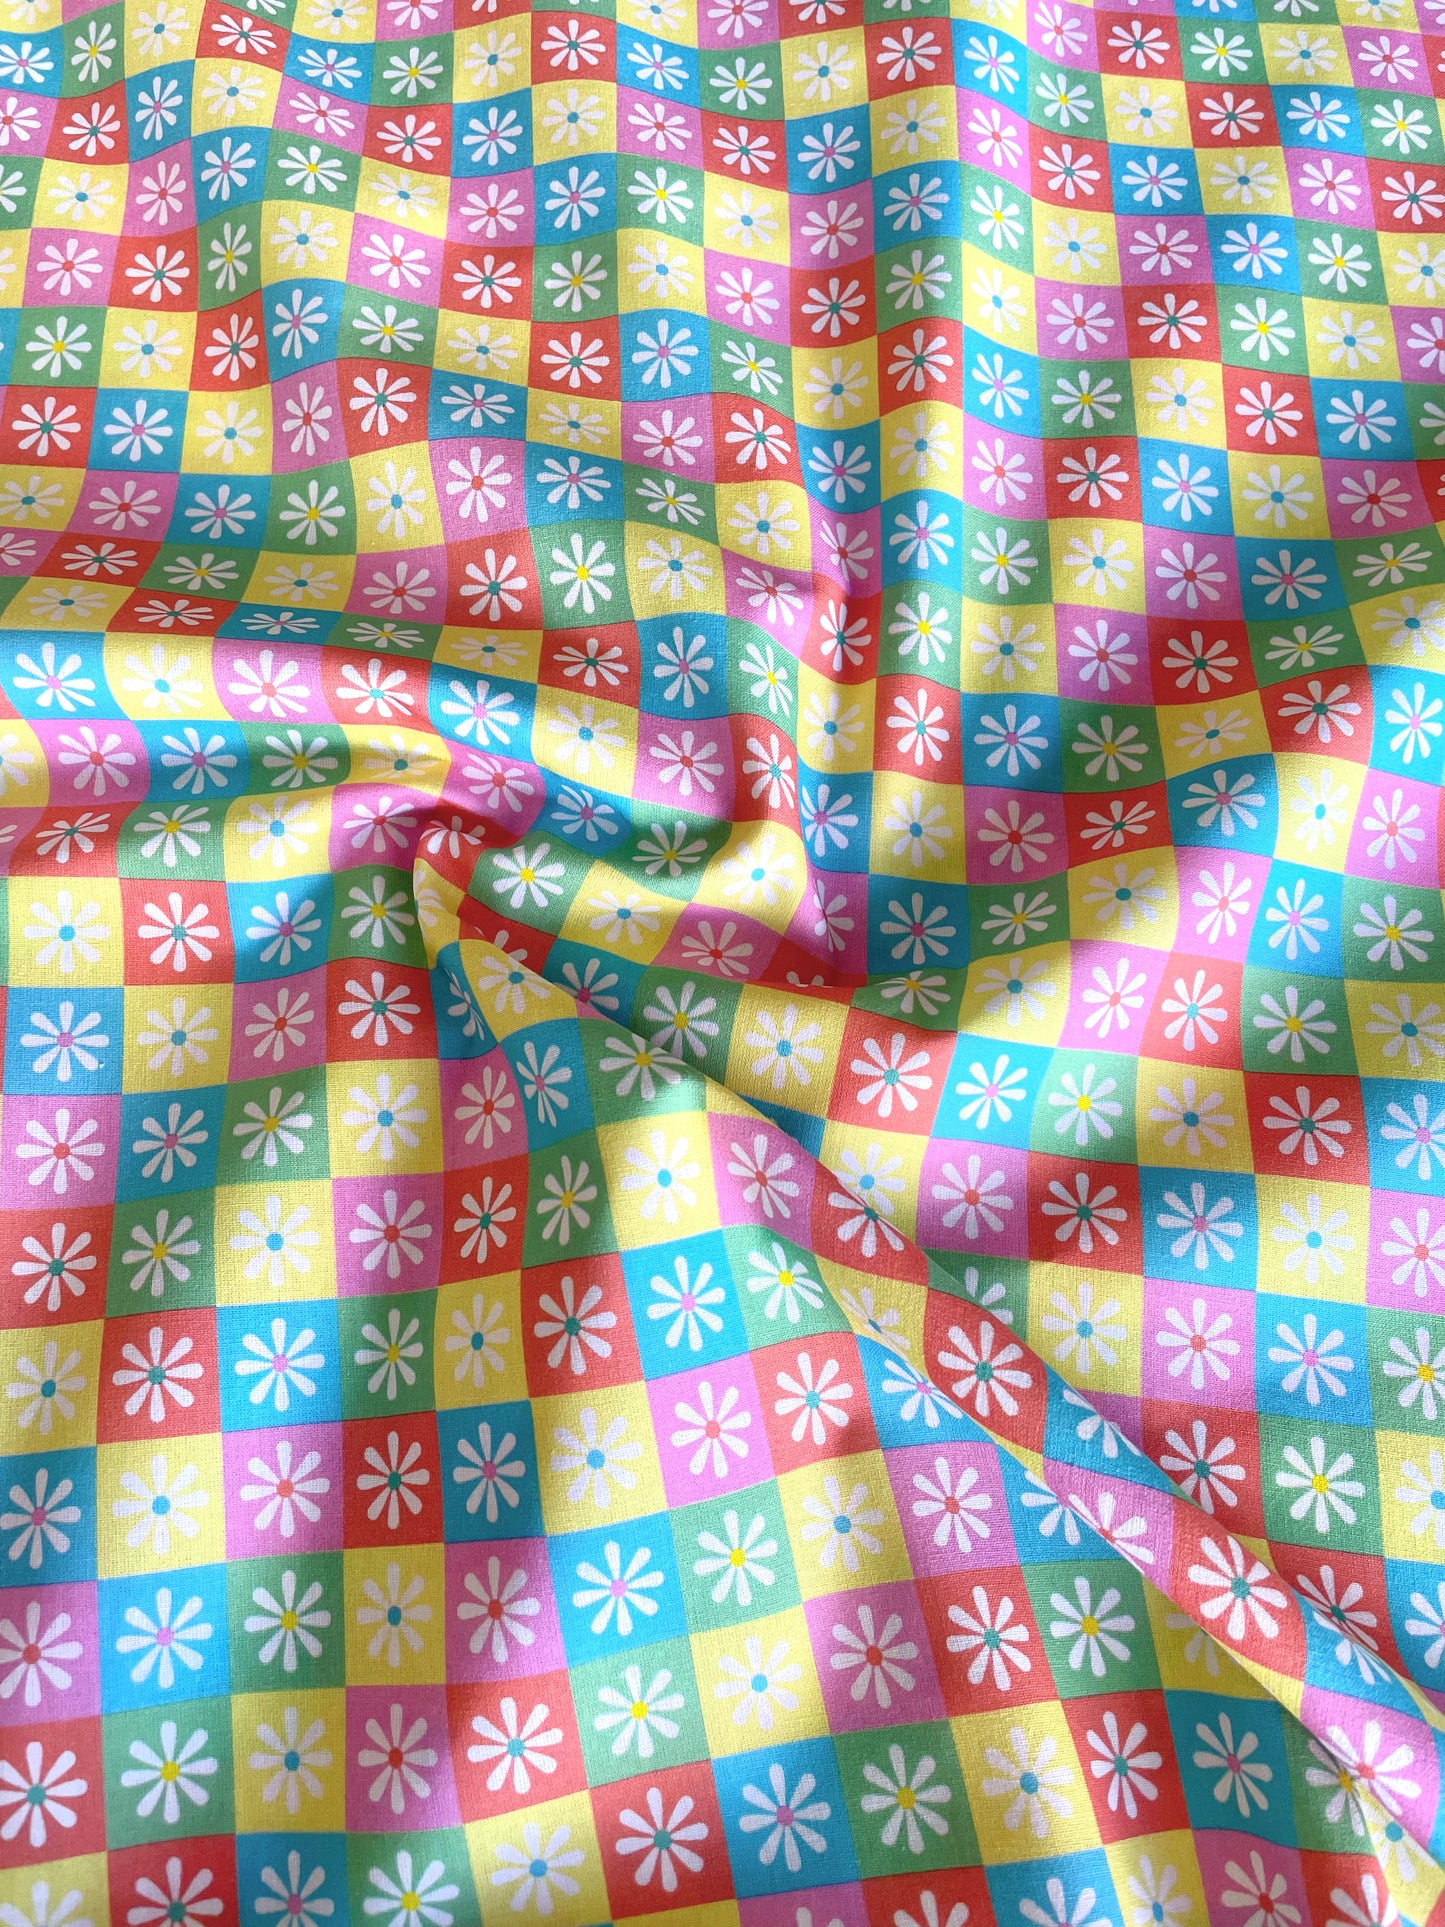 Checkered Daisy Cotton - Little Johnny - REMNANT - 270cm x 150cm - FLAW